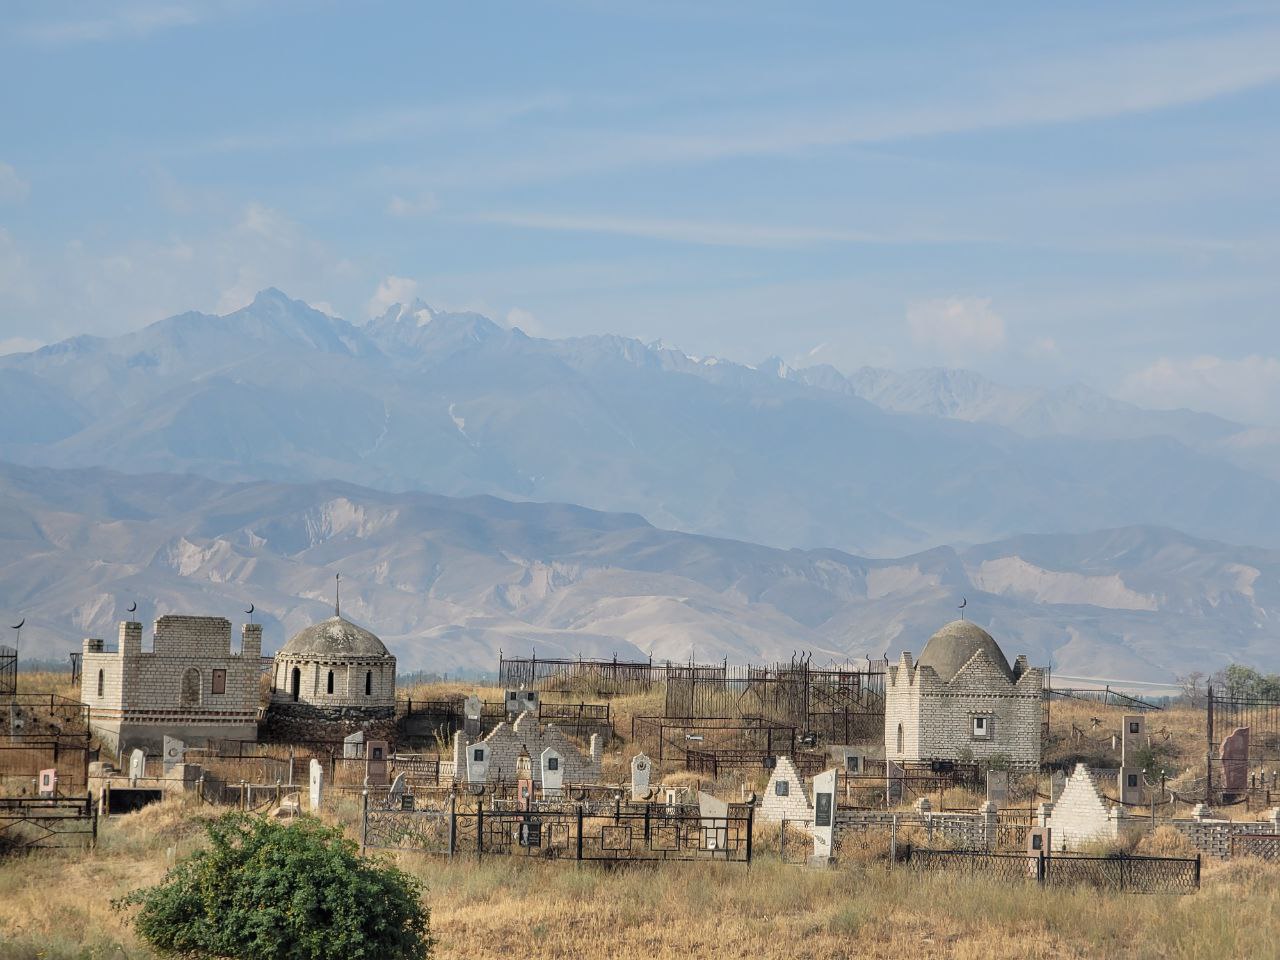 from afar - tombstones inside fenced plots and three small mausoleums. mountains in the background